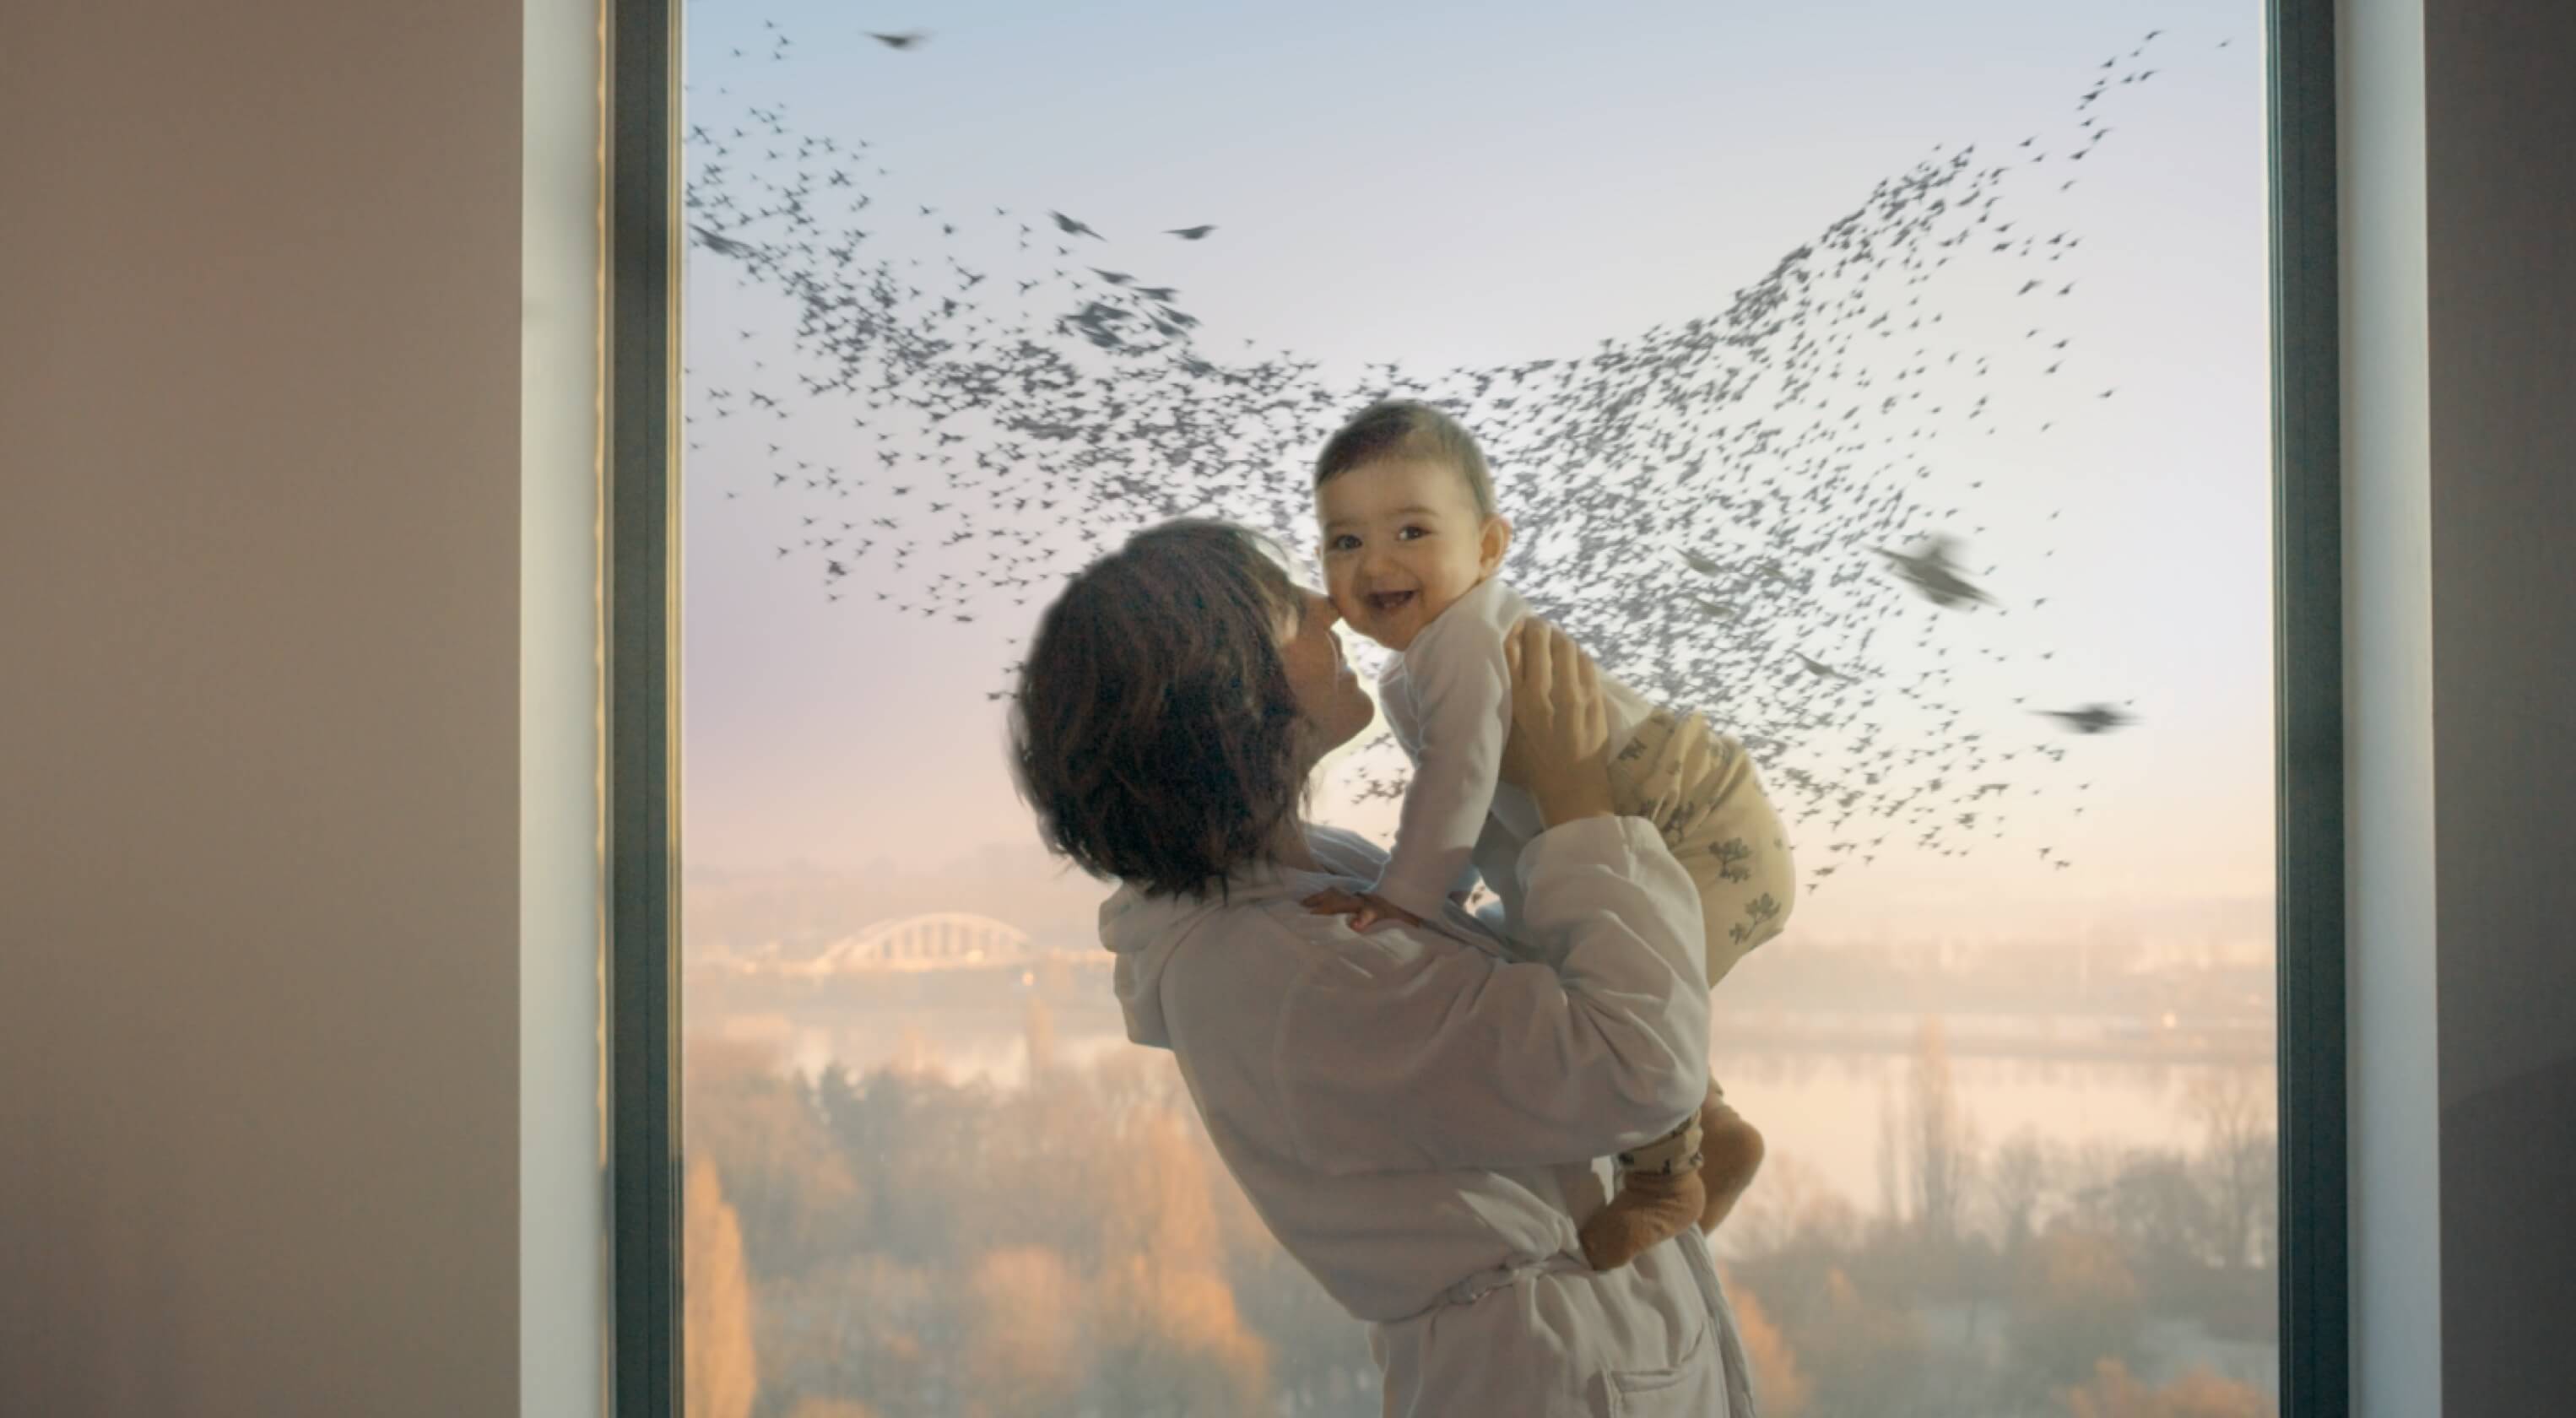 A woman embracing her baby. Through the window behind her, a murmuration of birds flies past